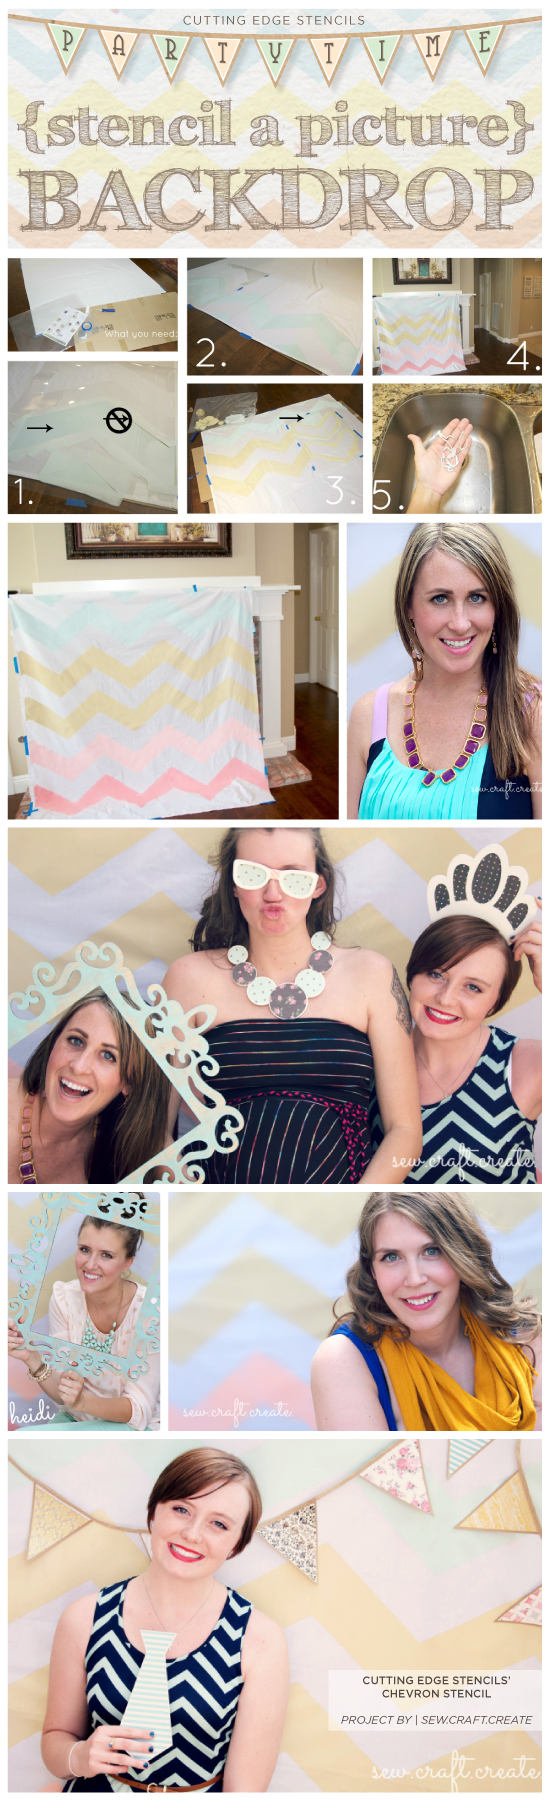 Use stencils to create a fun photogrpahy backdrop for your next party! www.cuttingedgestencils.com